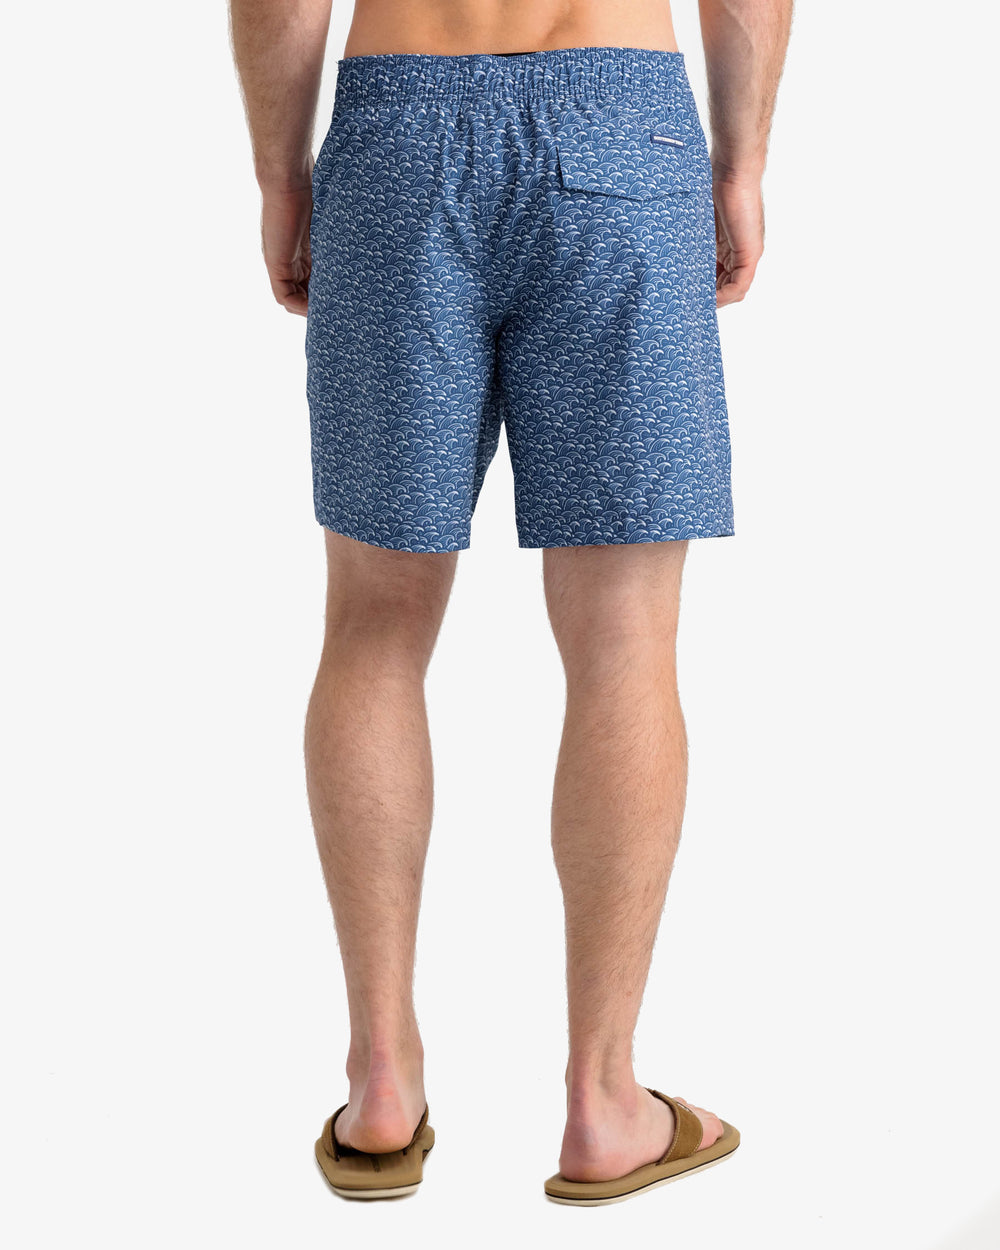 The back view of the Southern Tide Araby Cove Swim Short by Southern Tide - Aged Denim